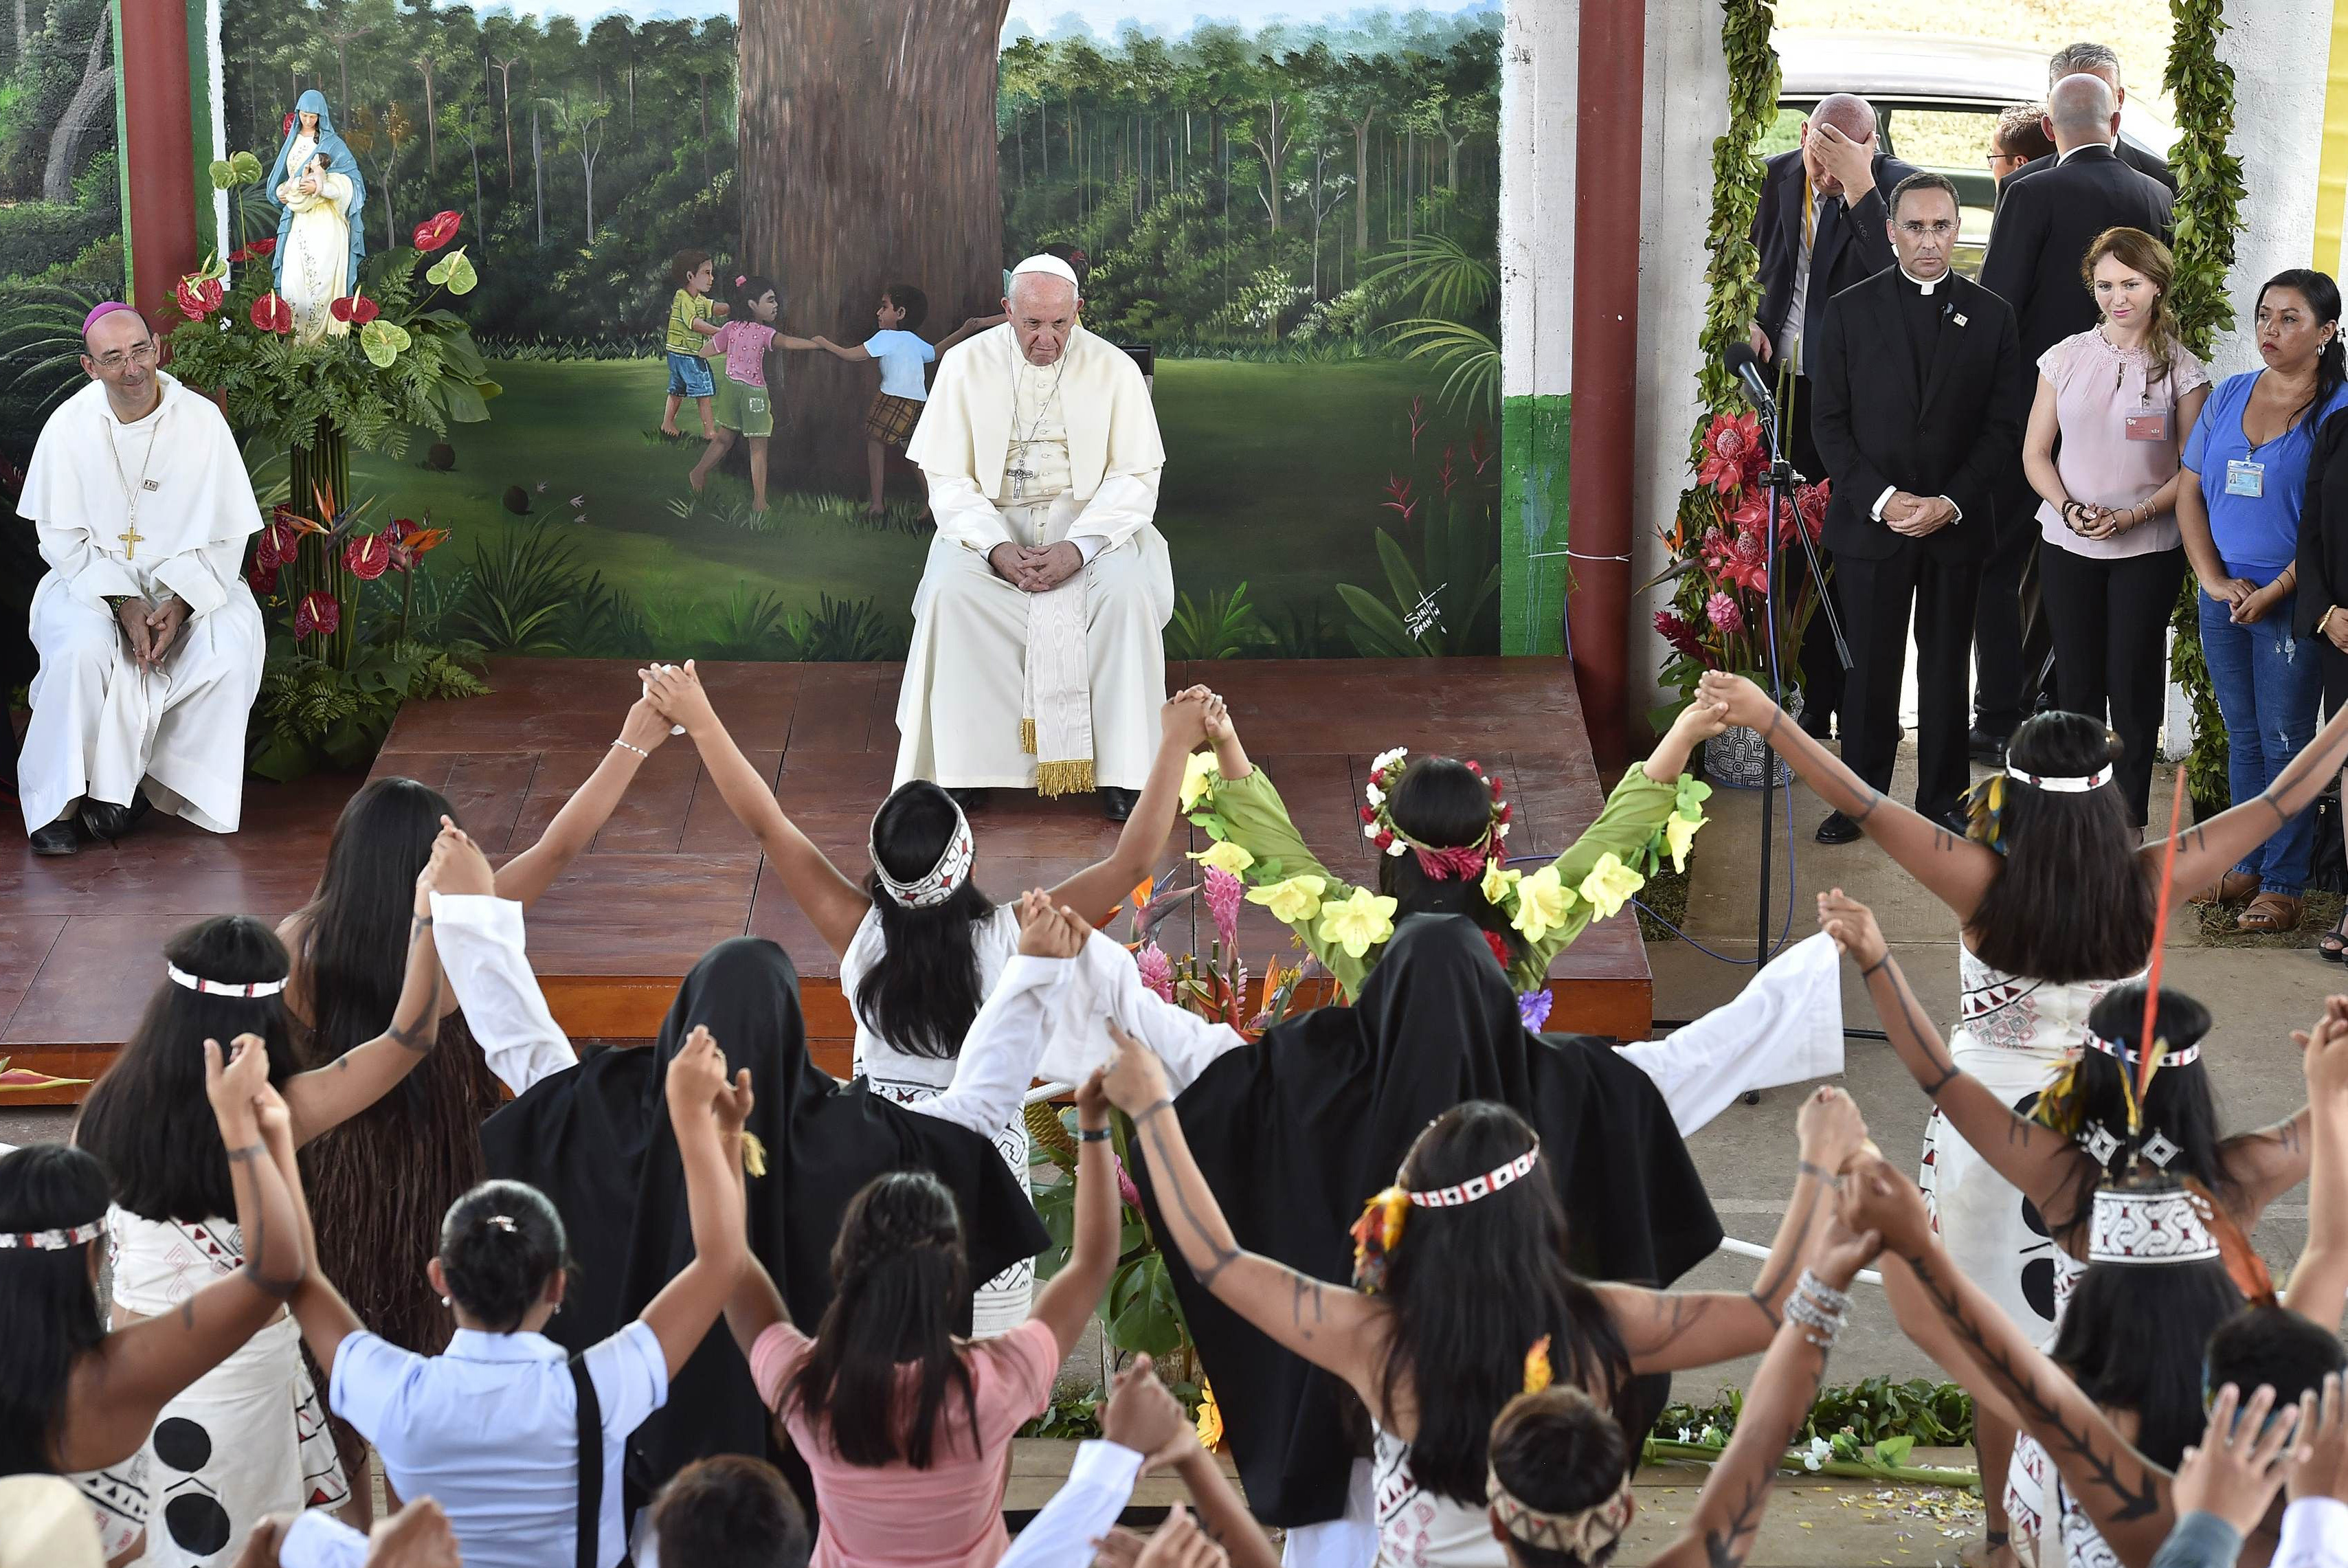 Pope Francis hears the 'cry of the poor' in Peru